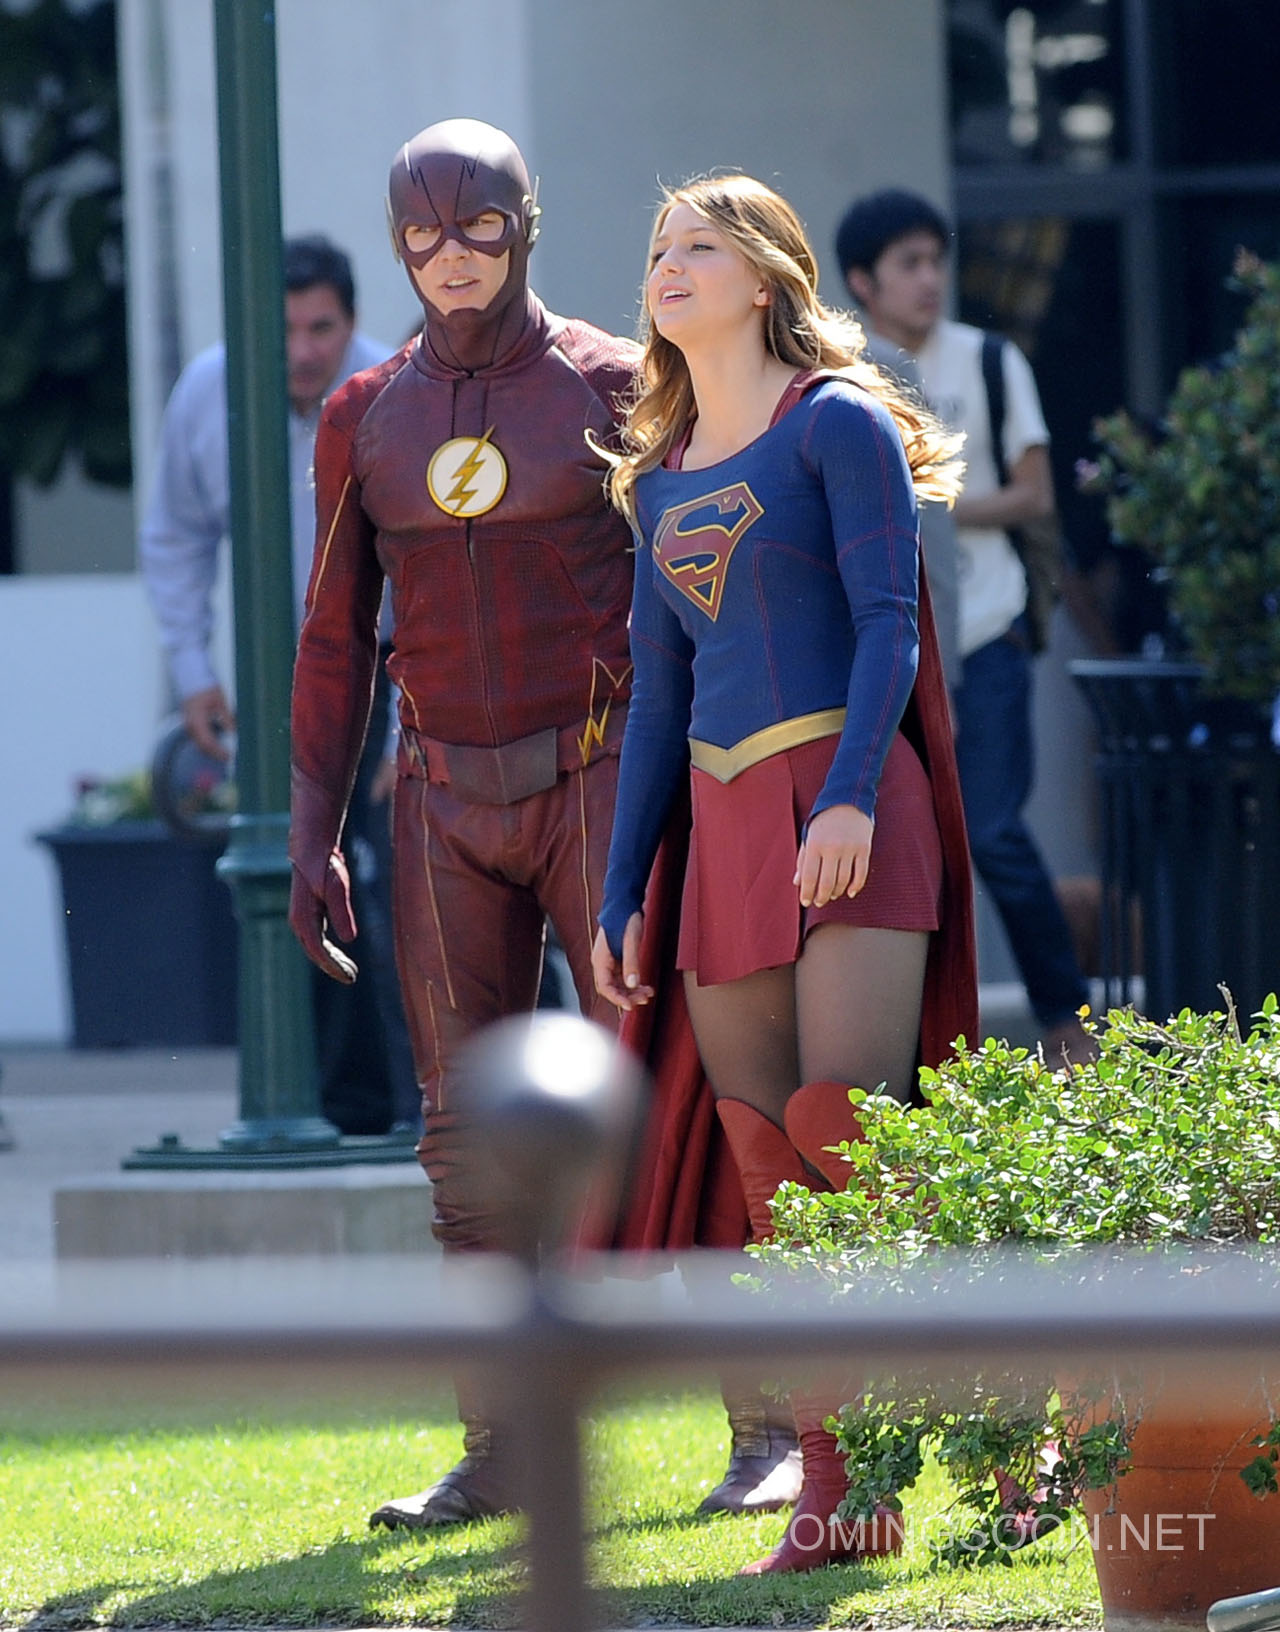 The Flash on the Supergirl Set